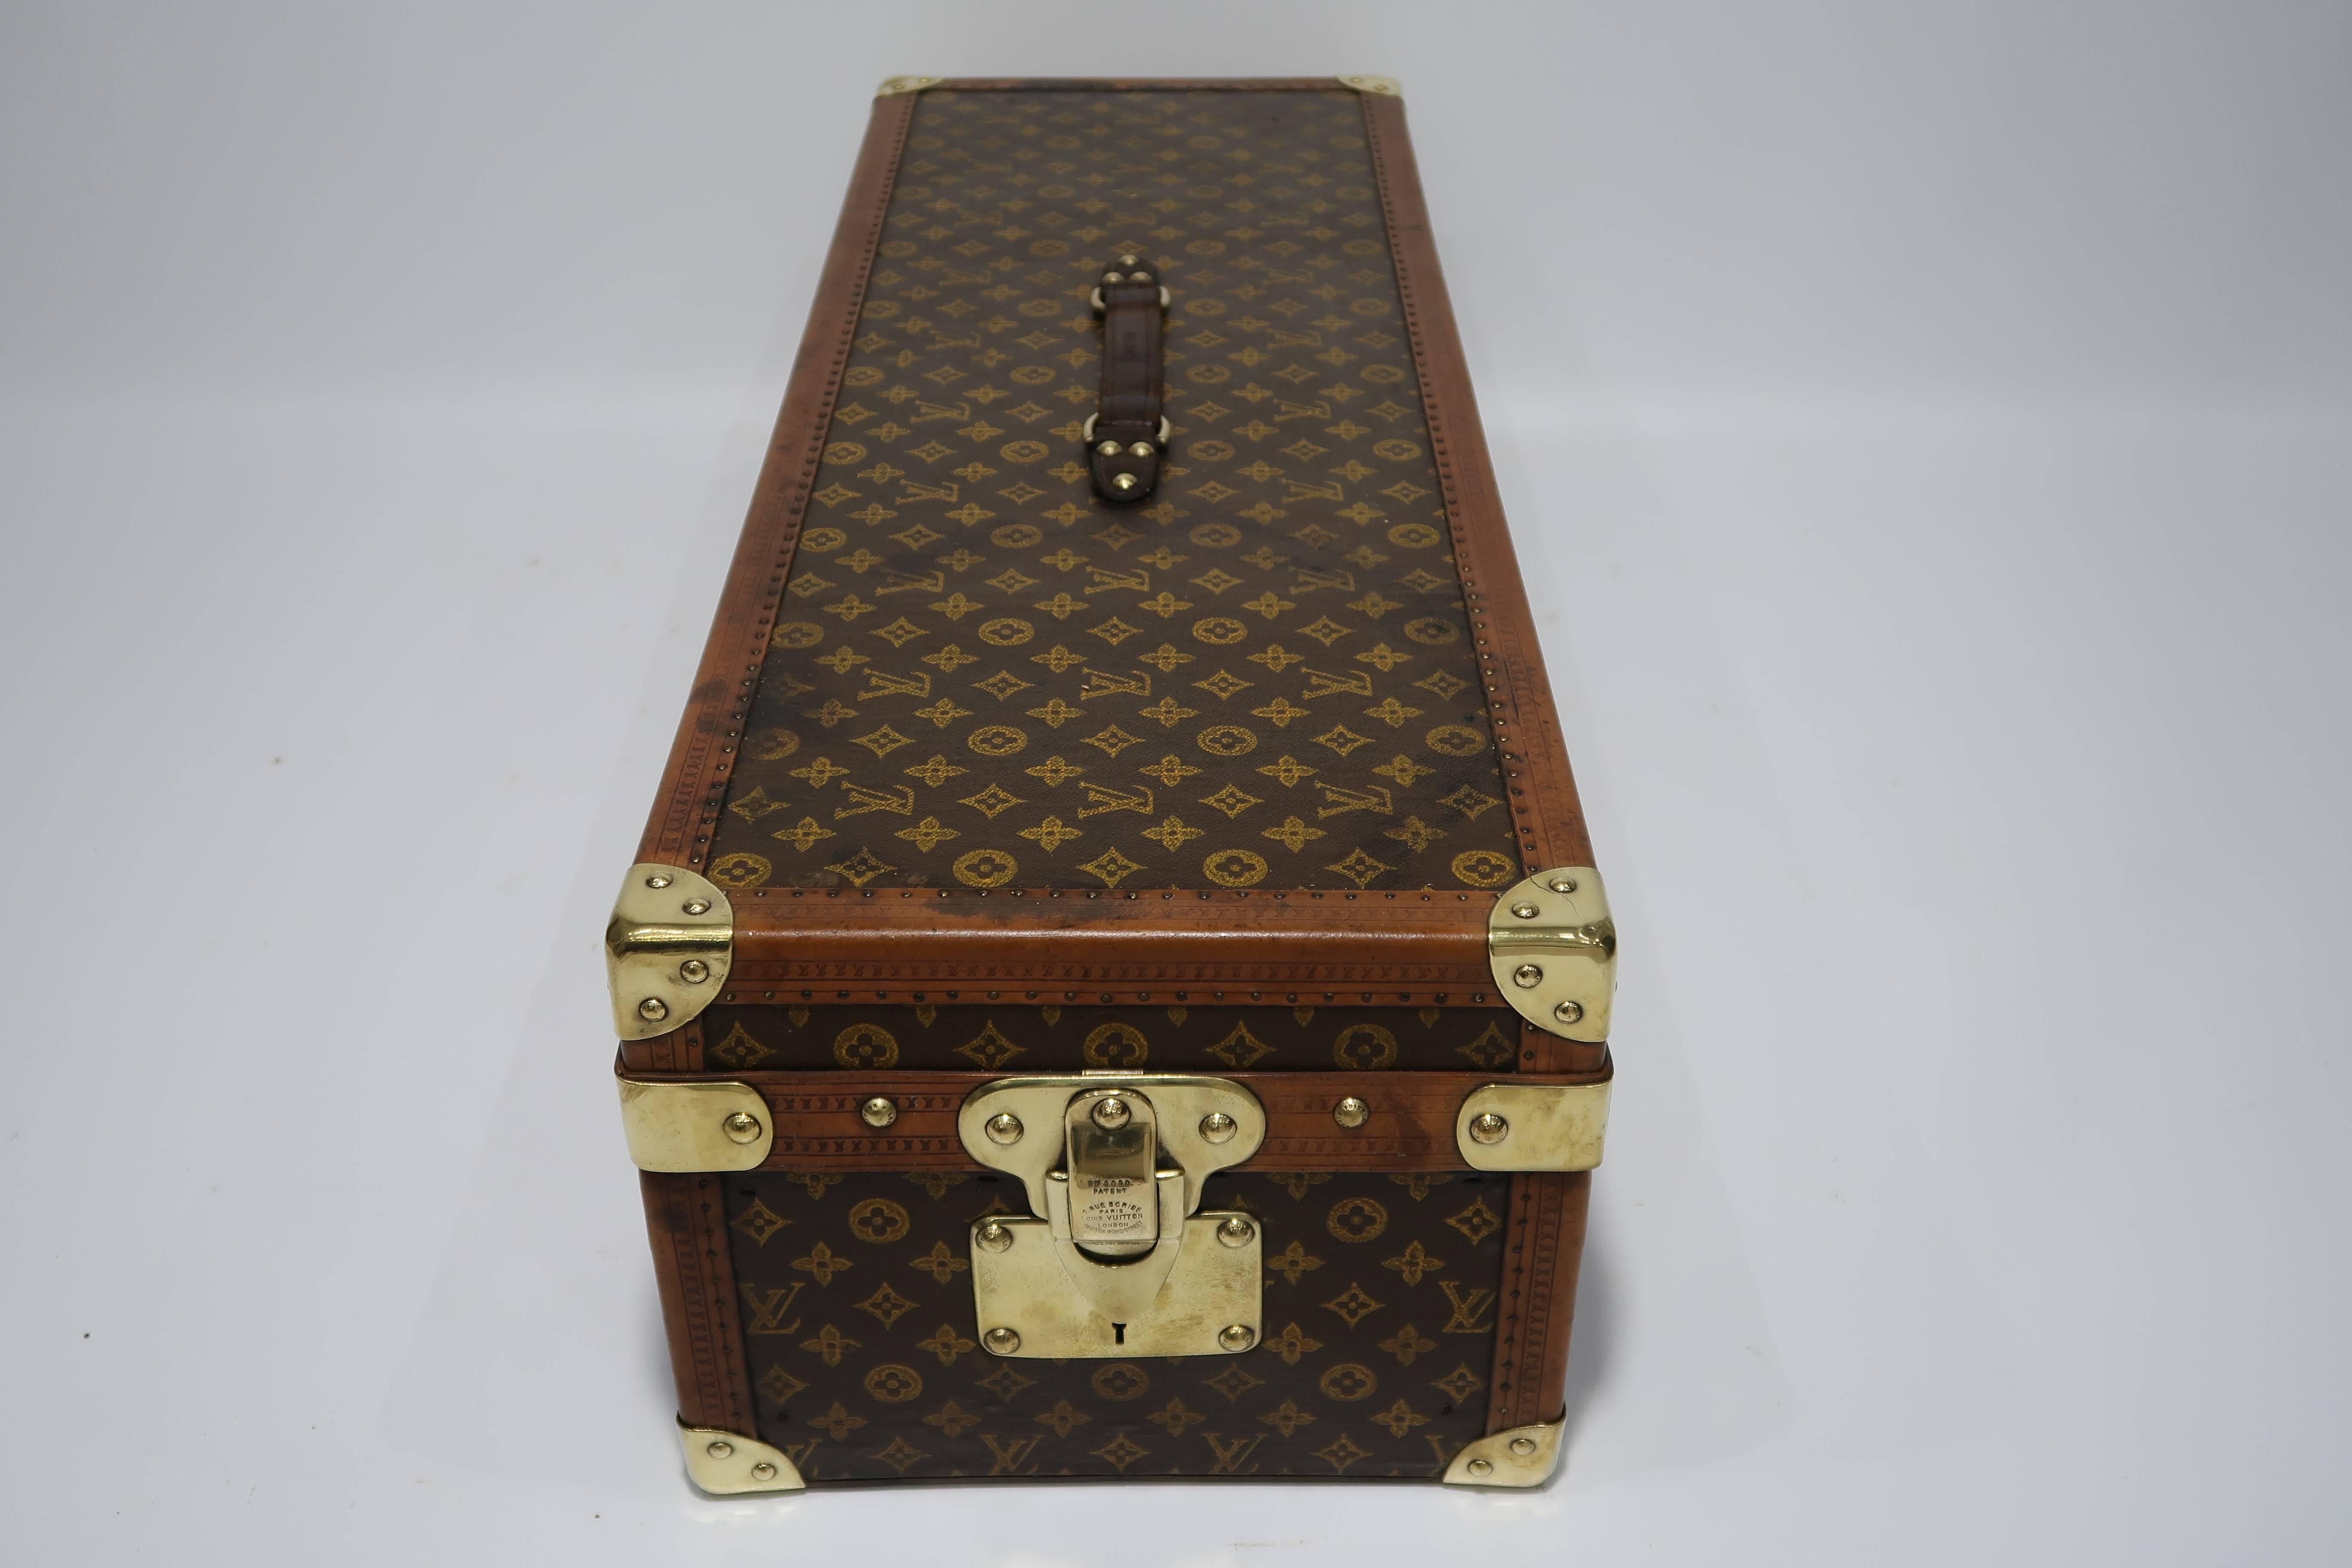 A Louis Vuitton Encyclopaedia Britannica library trunk, one of the 100 Legendary Trunks, made in 1910,
canvas case with LV monogram, lozine, brass rivets, locks, key and reinforced corners, leather handle, opening to reveal brown fabric lined